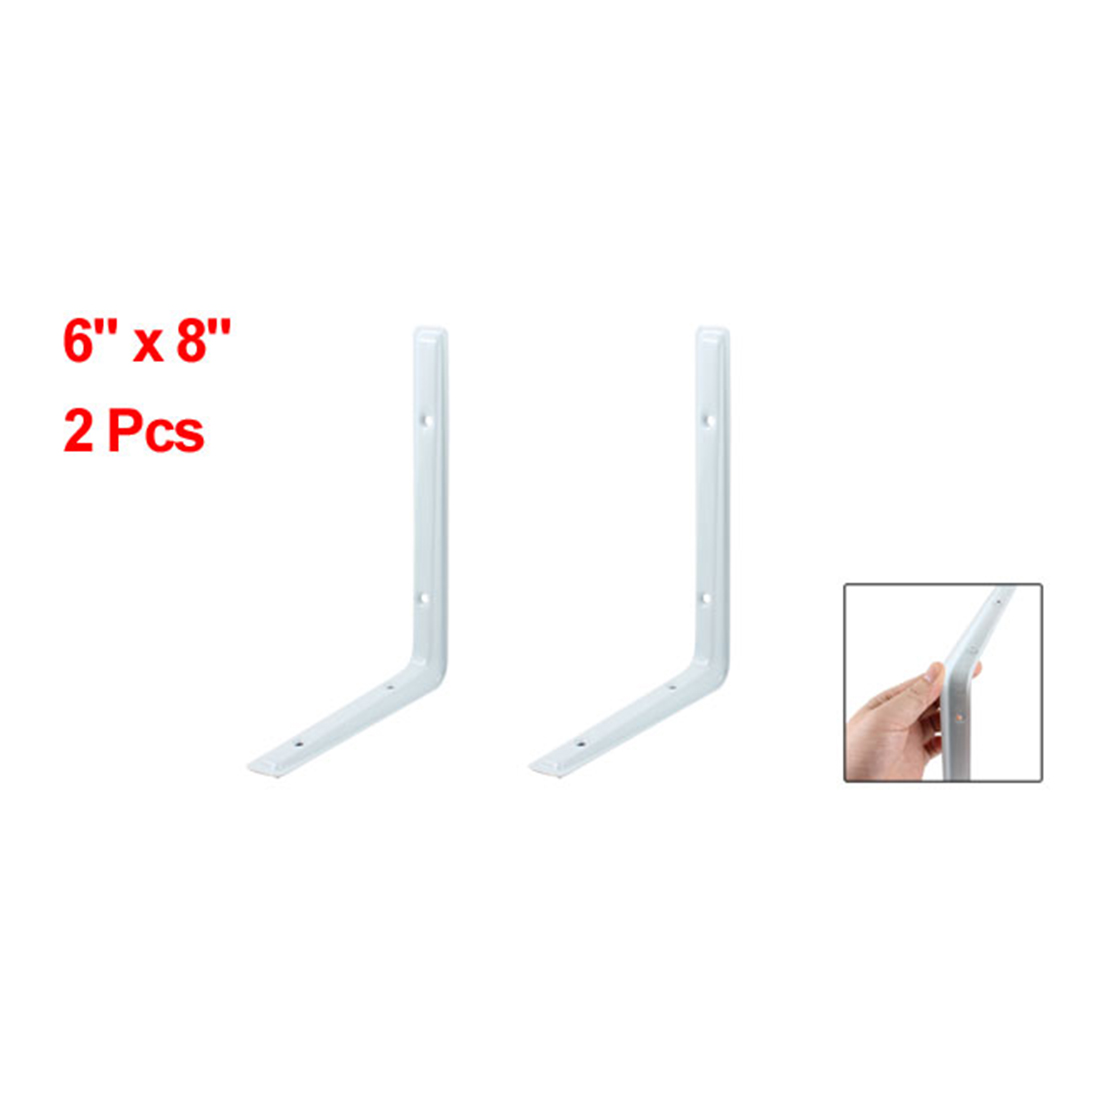 Uxcell 6" x 8" Metal Right Angle Bracket Shelf Off White Replacement, 2 Pack - image 2 of 4